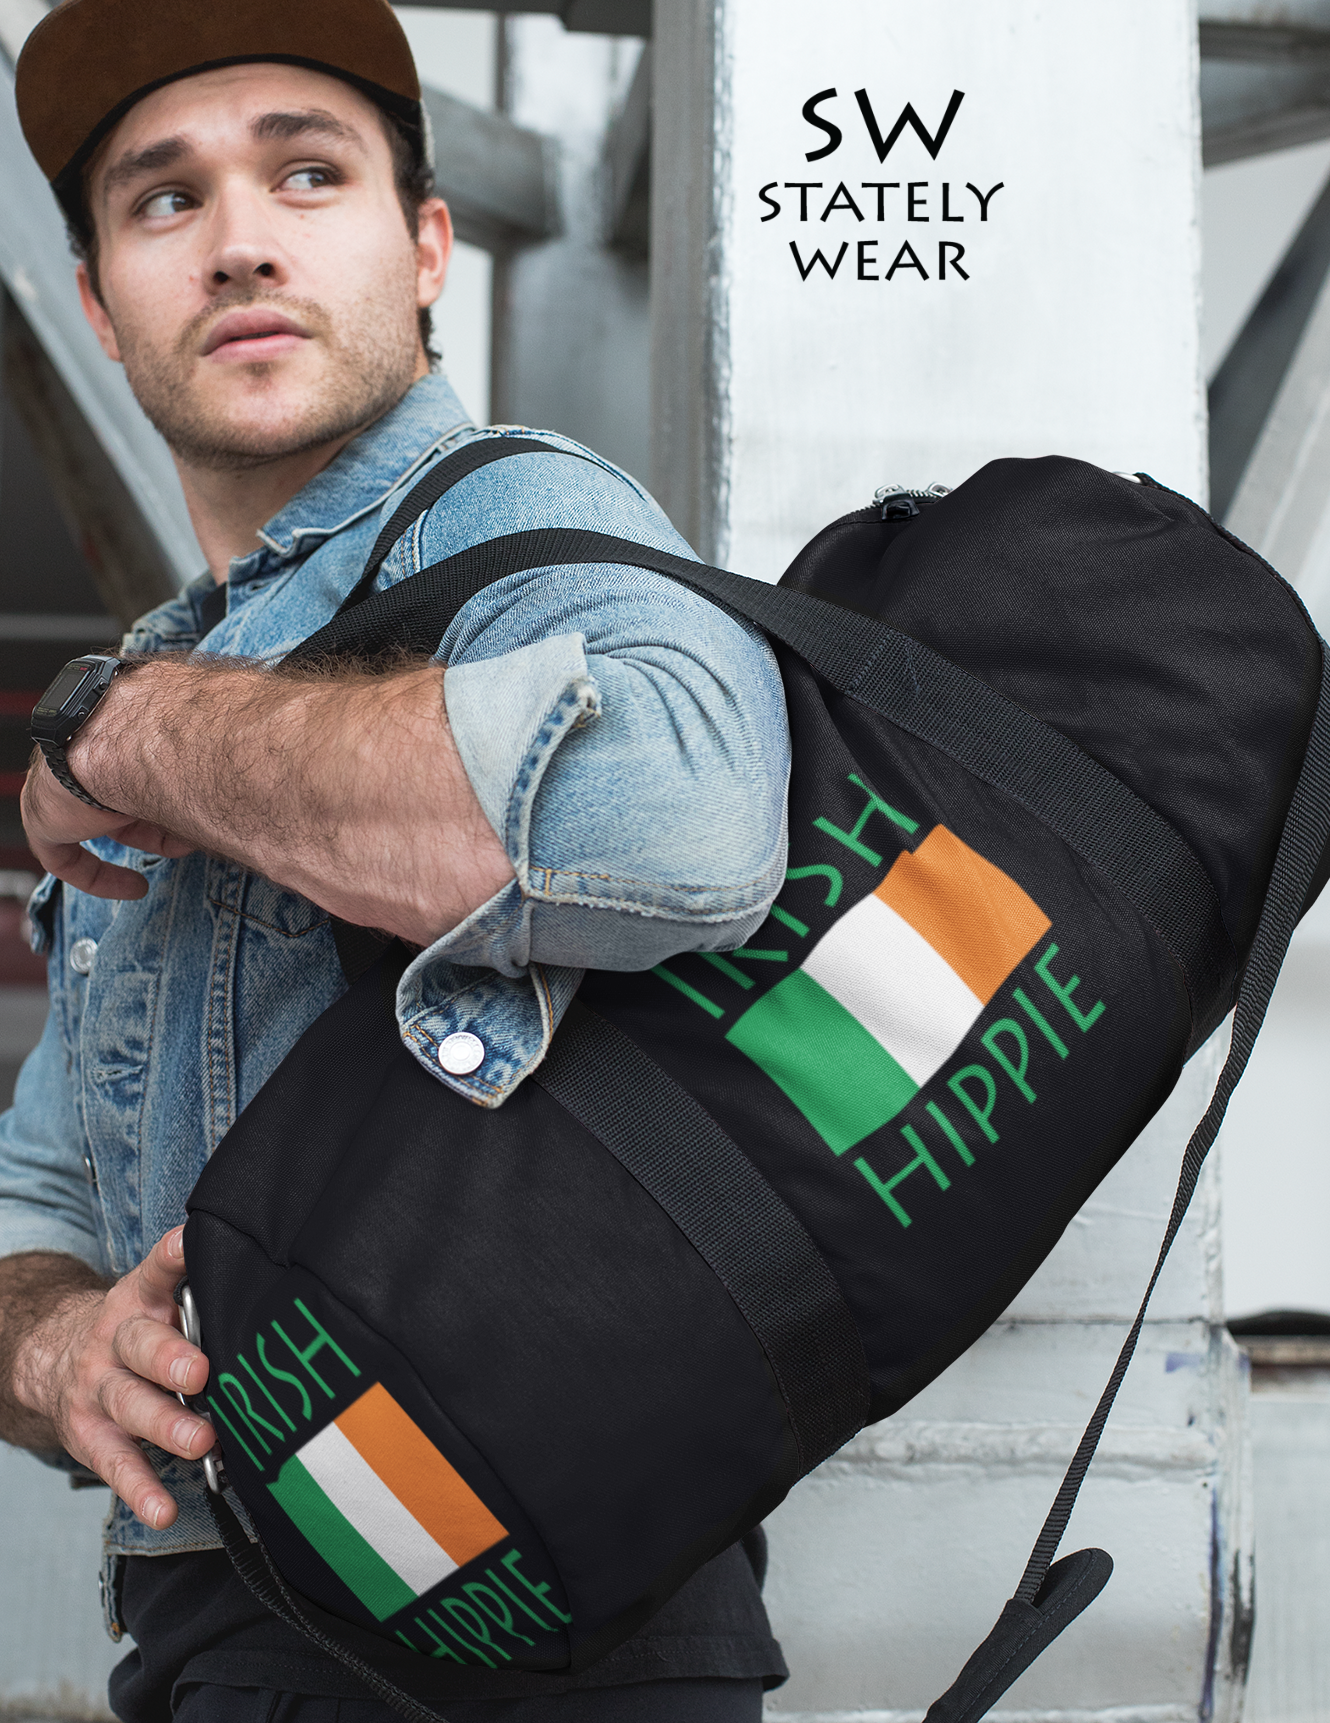 You will love Stately Wear's Irish Flag Hippie duffel bag. Katie Couric Shop partner. Perfect accessory as a beach bag, ski bag, travel bag & gym or yoga bag.  Custom made one-at-a-time.  Environmentally friendly.  Biodegradable inks & dyes.  Good for the planet. 2 sizes to choose.